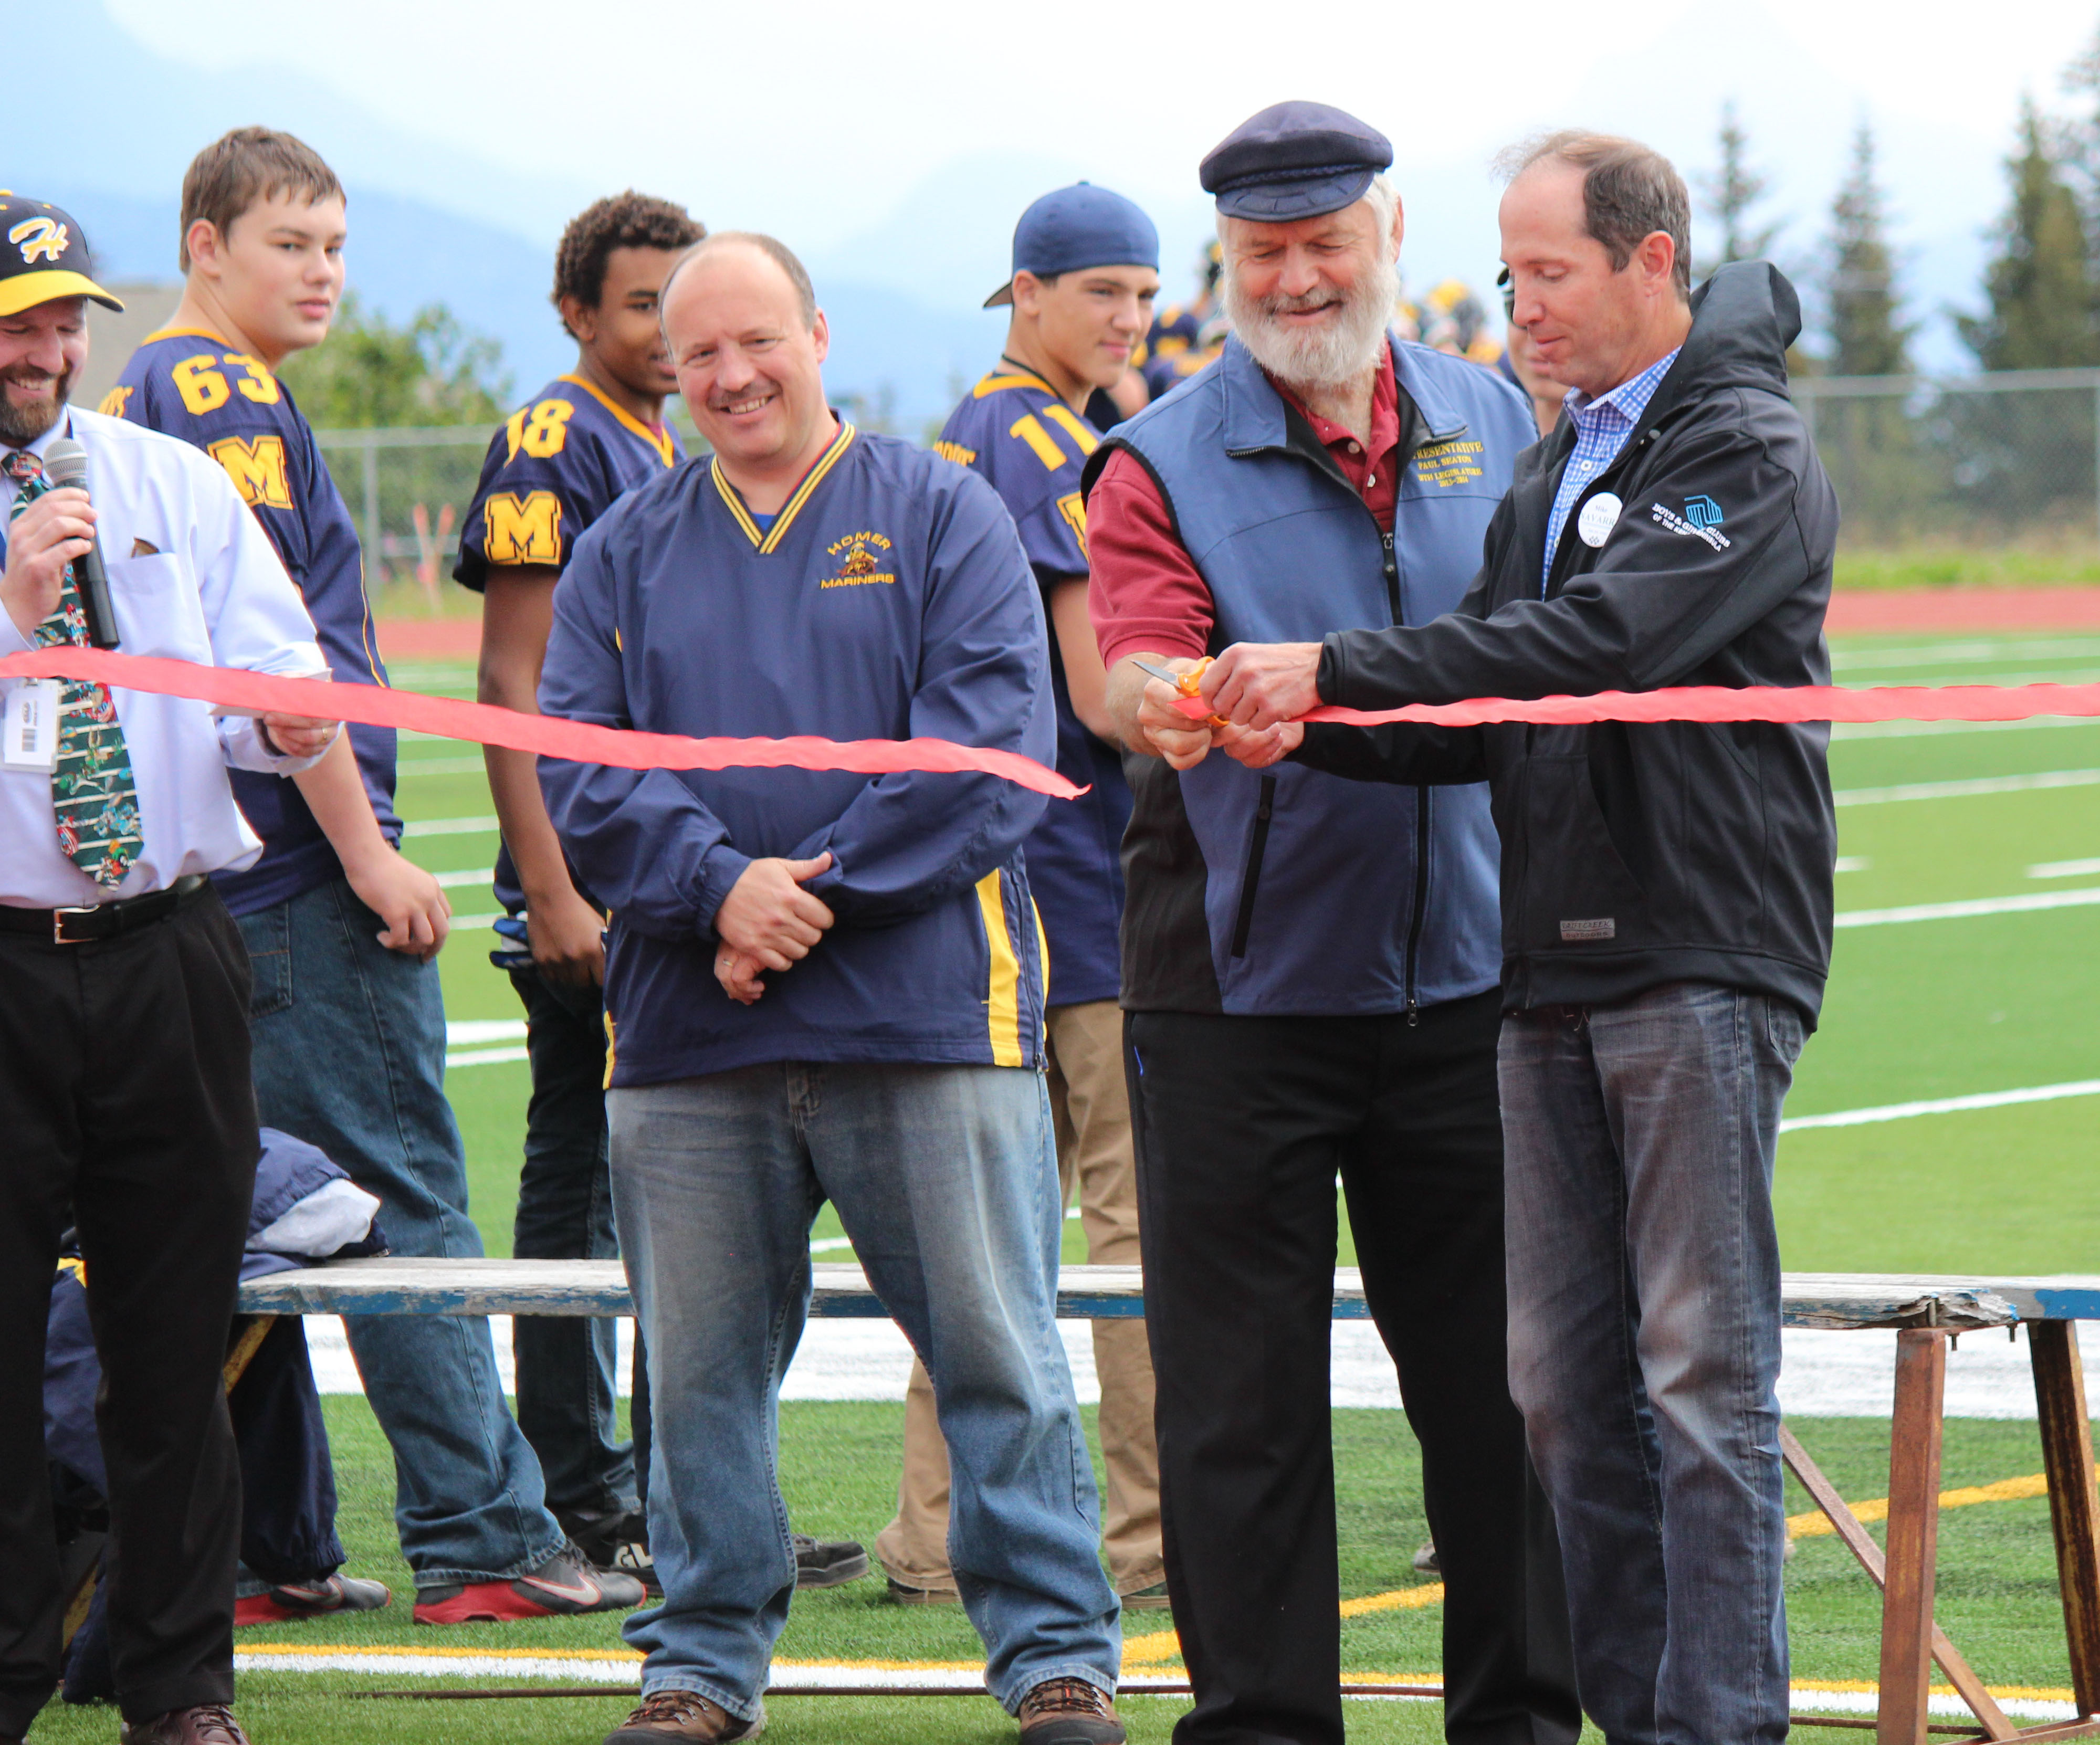 Rep. Paul Seaton, second from right, and Kenai Peninsula Borough Mayor Mike Navarre, right, cut the ribbon at the dedication ceremony of Homer High School’s new turf field on Saturday. Looking on are HHS Principal Doug Waclawski, left, and Kenai Peninsula Borough School District Assistant Superintendent Sean Dusek, with members of the Mariners football team in the background. Exhibitions of different sports that will use the field took place during halftime of the Mariners’ Satuarday game against Eielson.